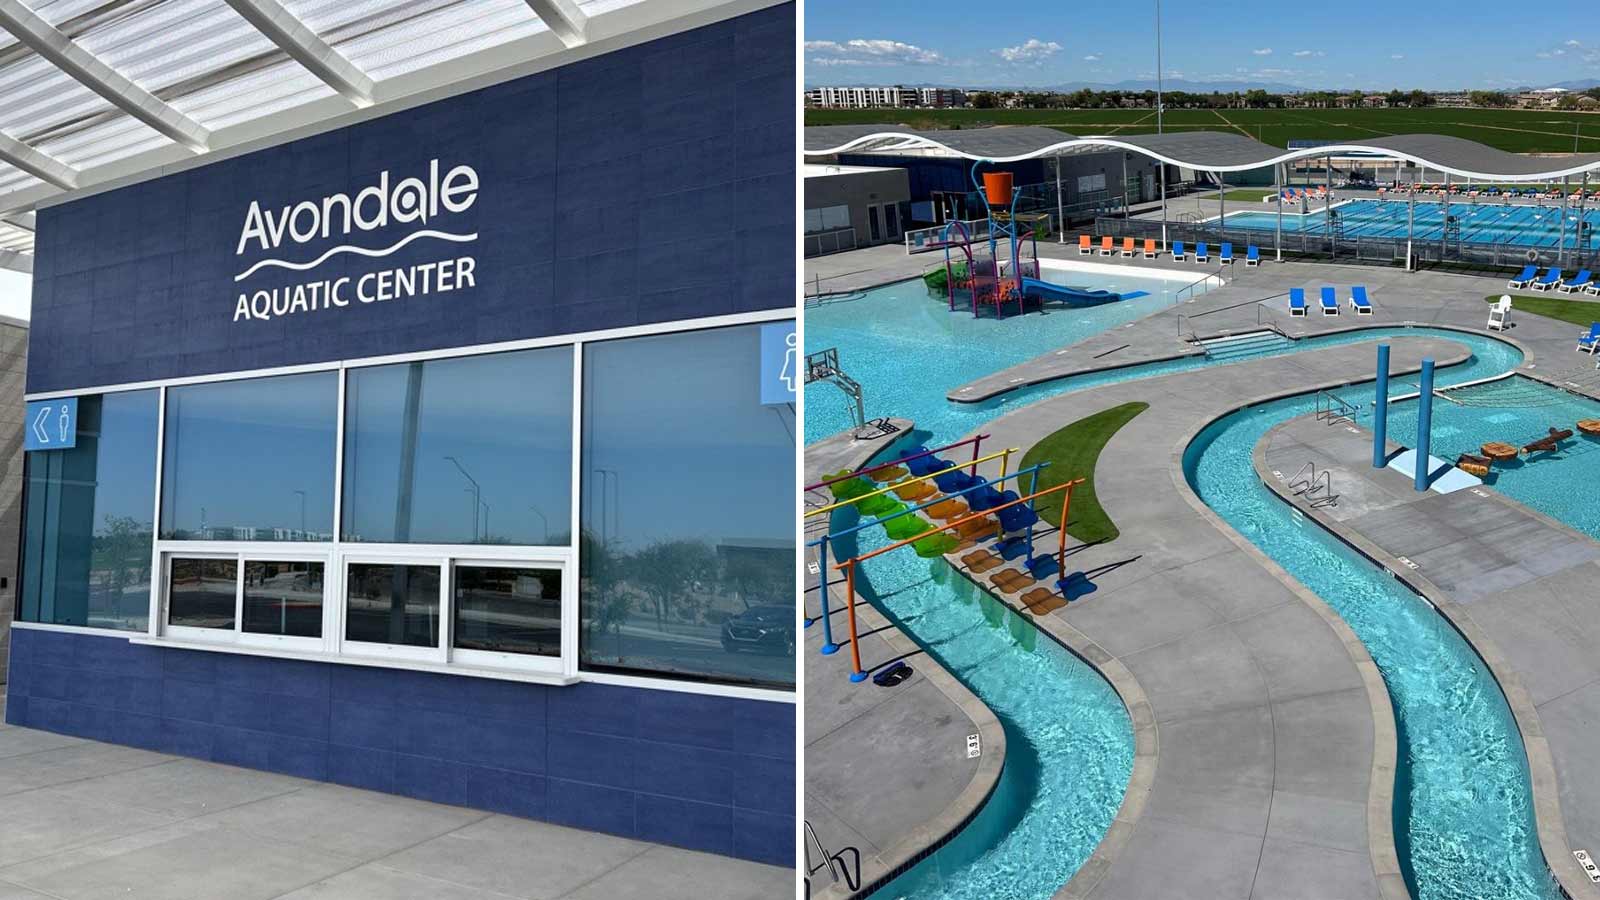 Split image showing the entry to the Avondale Aquatic Center on the left and an aerial view of the new facility on the right.